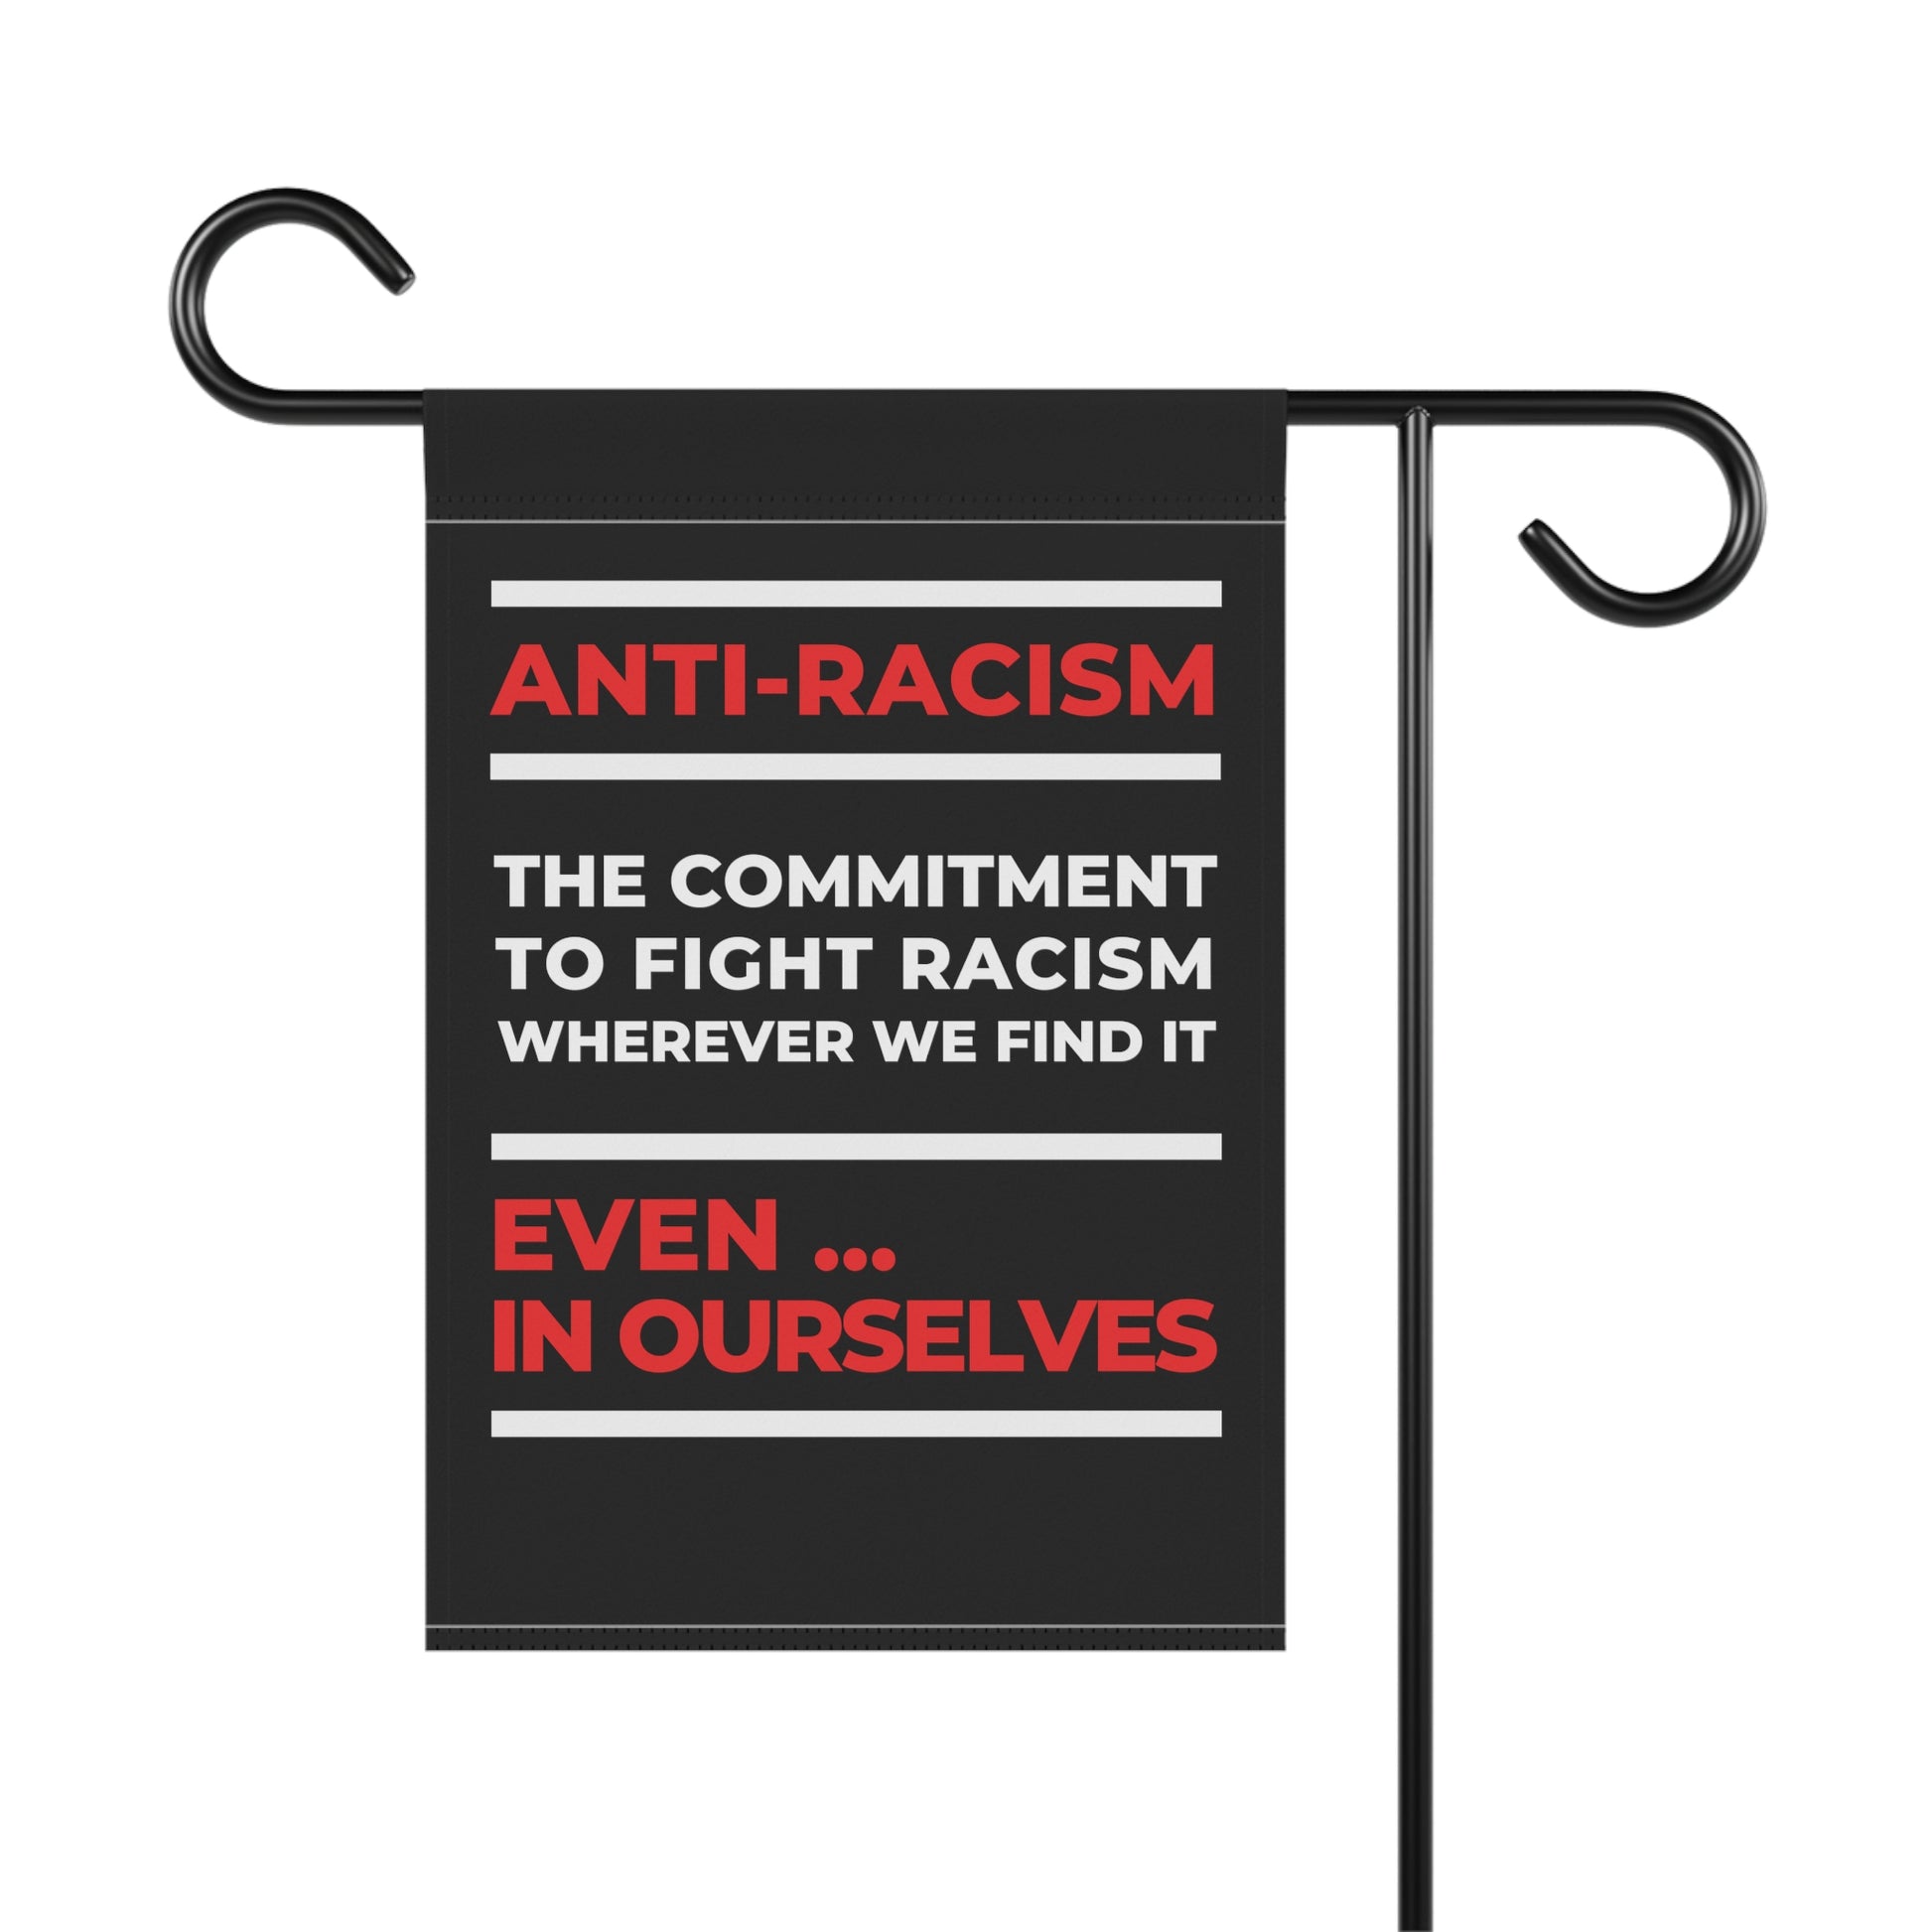 Celebrate diversity and stand against racism with this black garden flag that reflects your commitment to change. 12" x 18" flag with double sided design in red and white